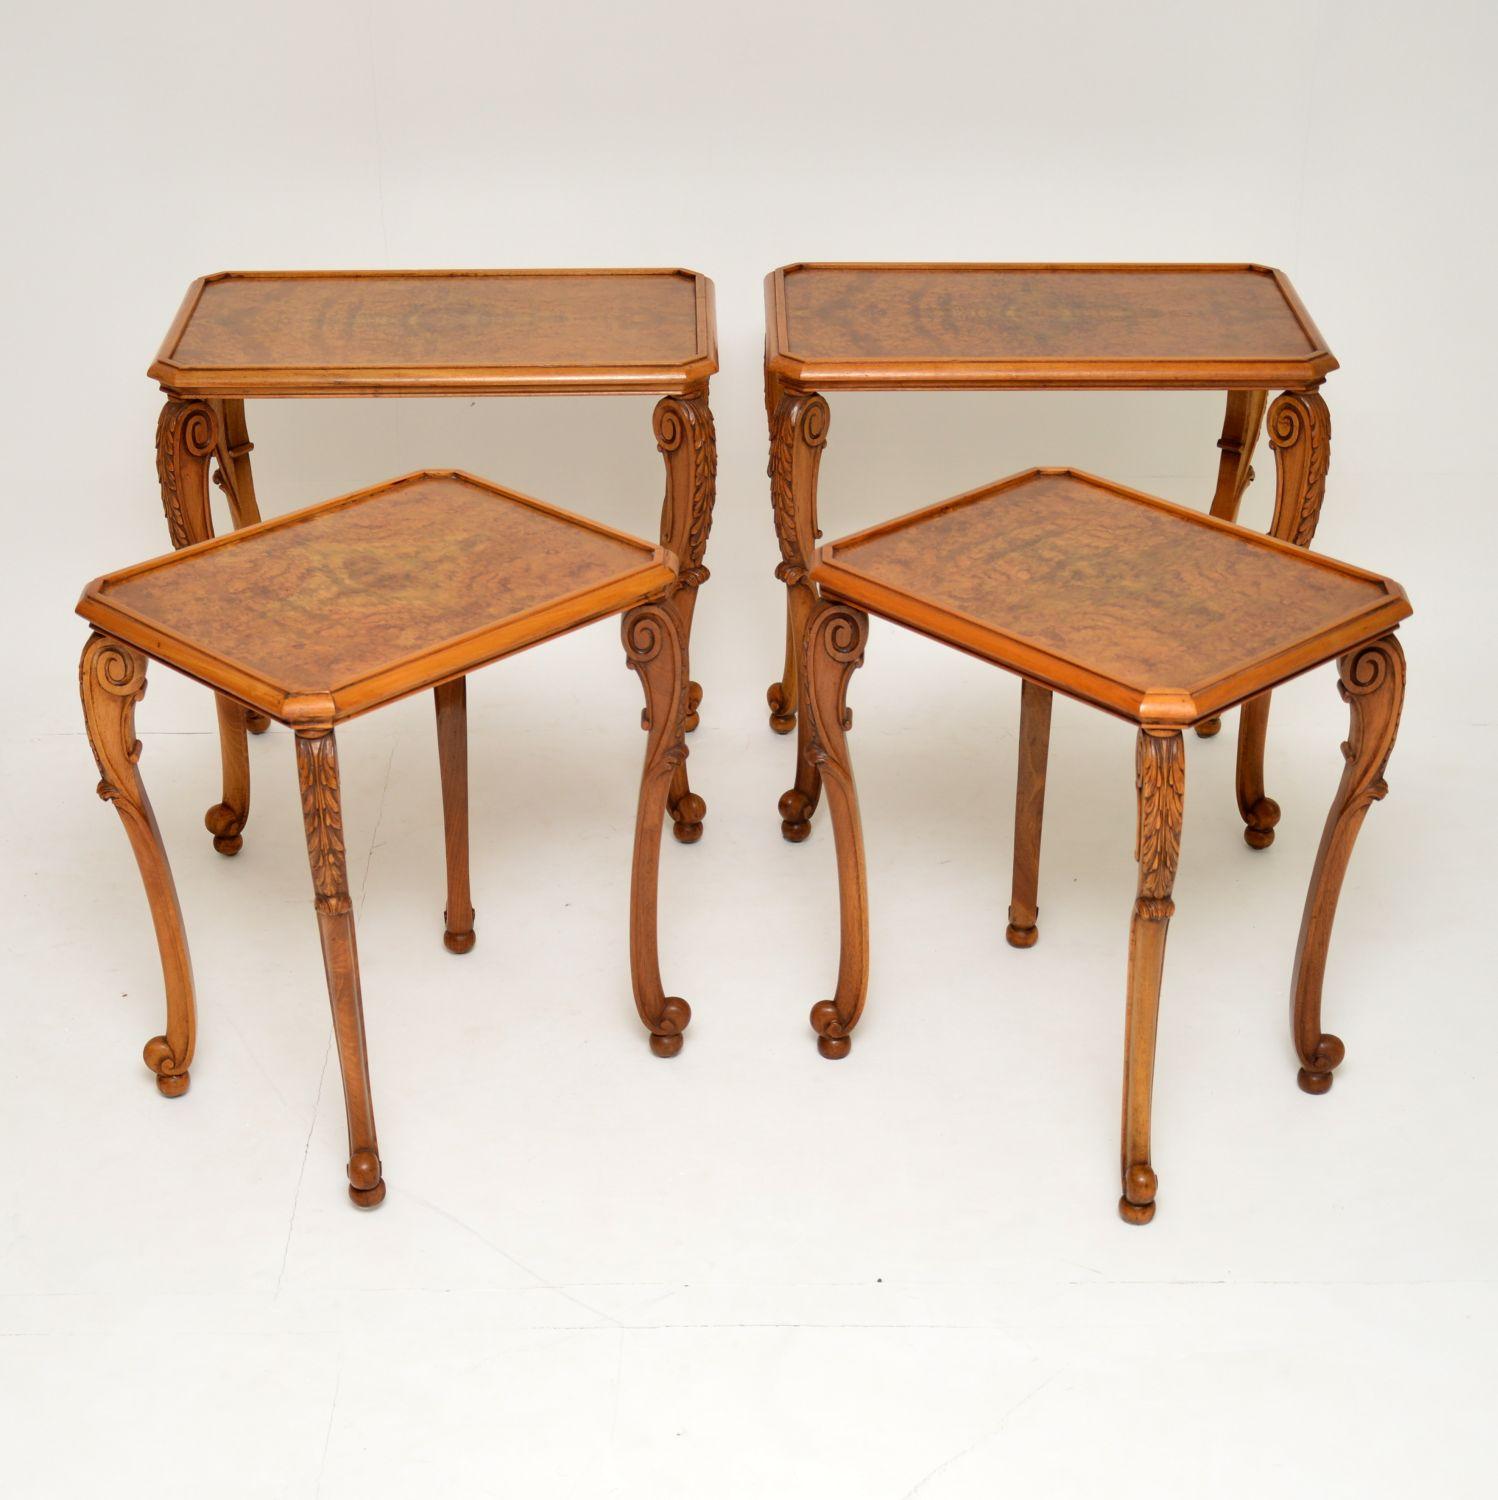 Queen Anne Pair of Antique Burr Walnut Nesting Side Tables